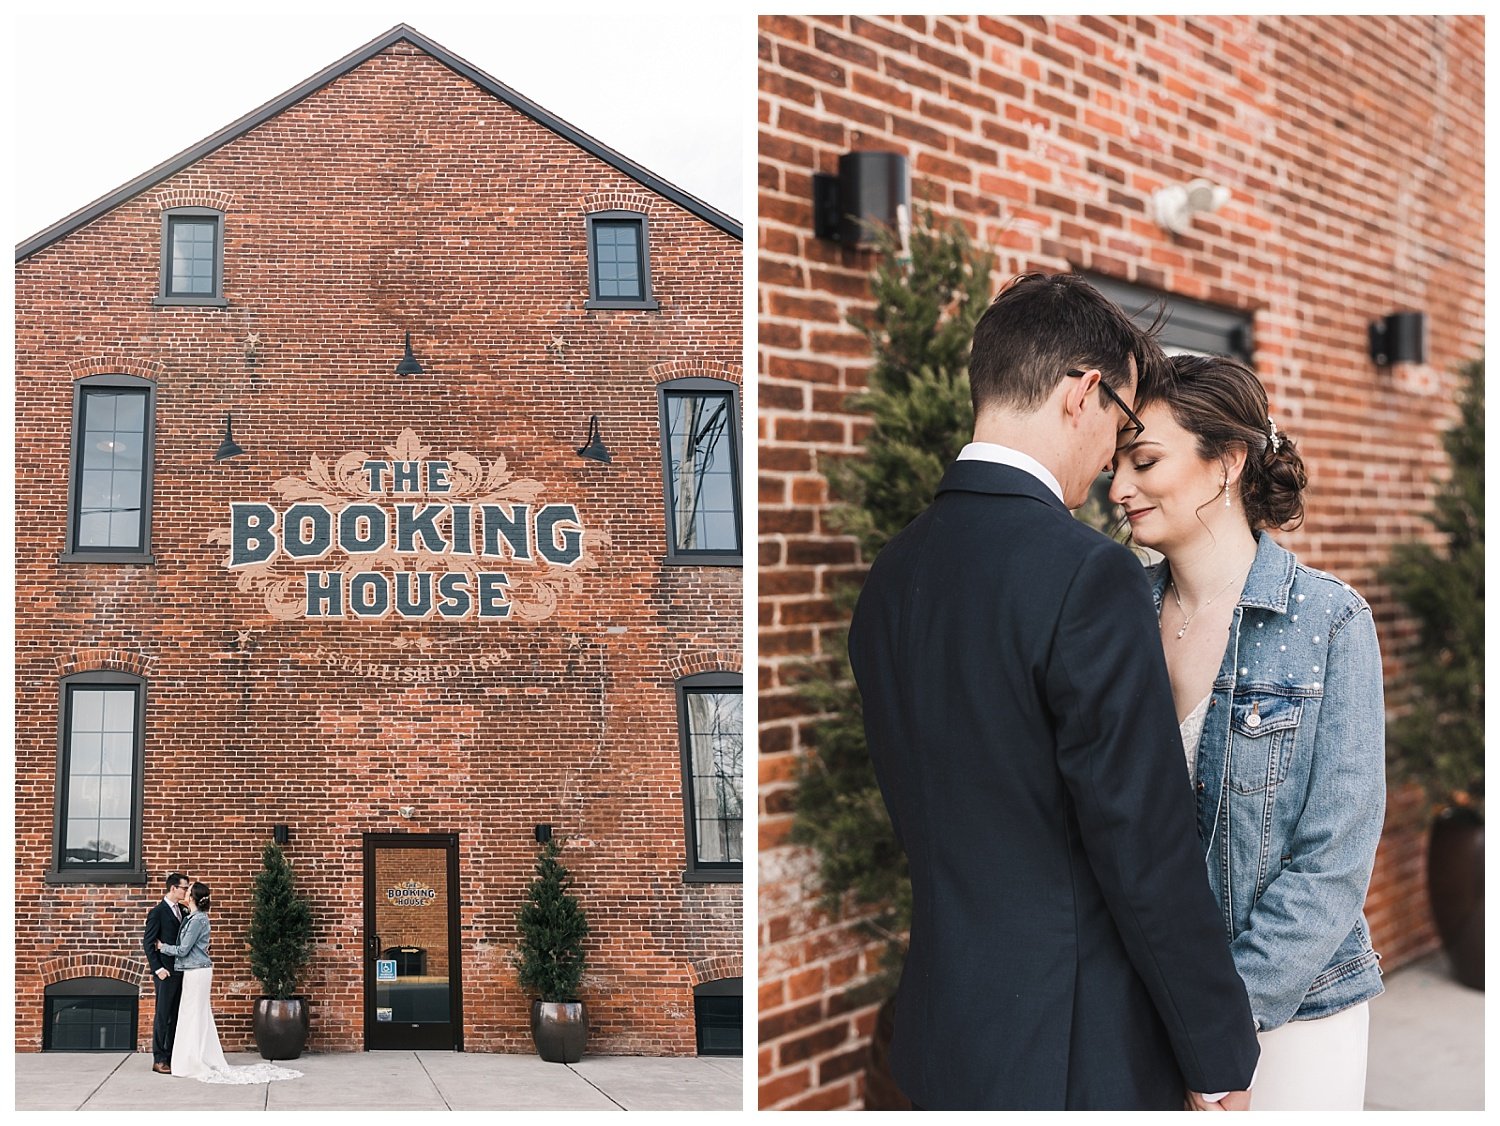 The Booking House wedding, Manheim PA, bride and groom portrait